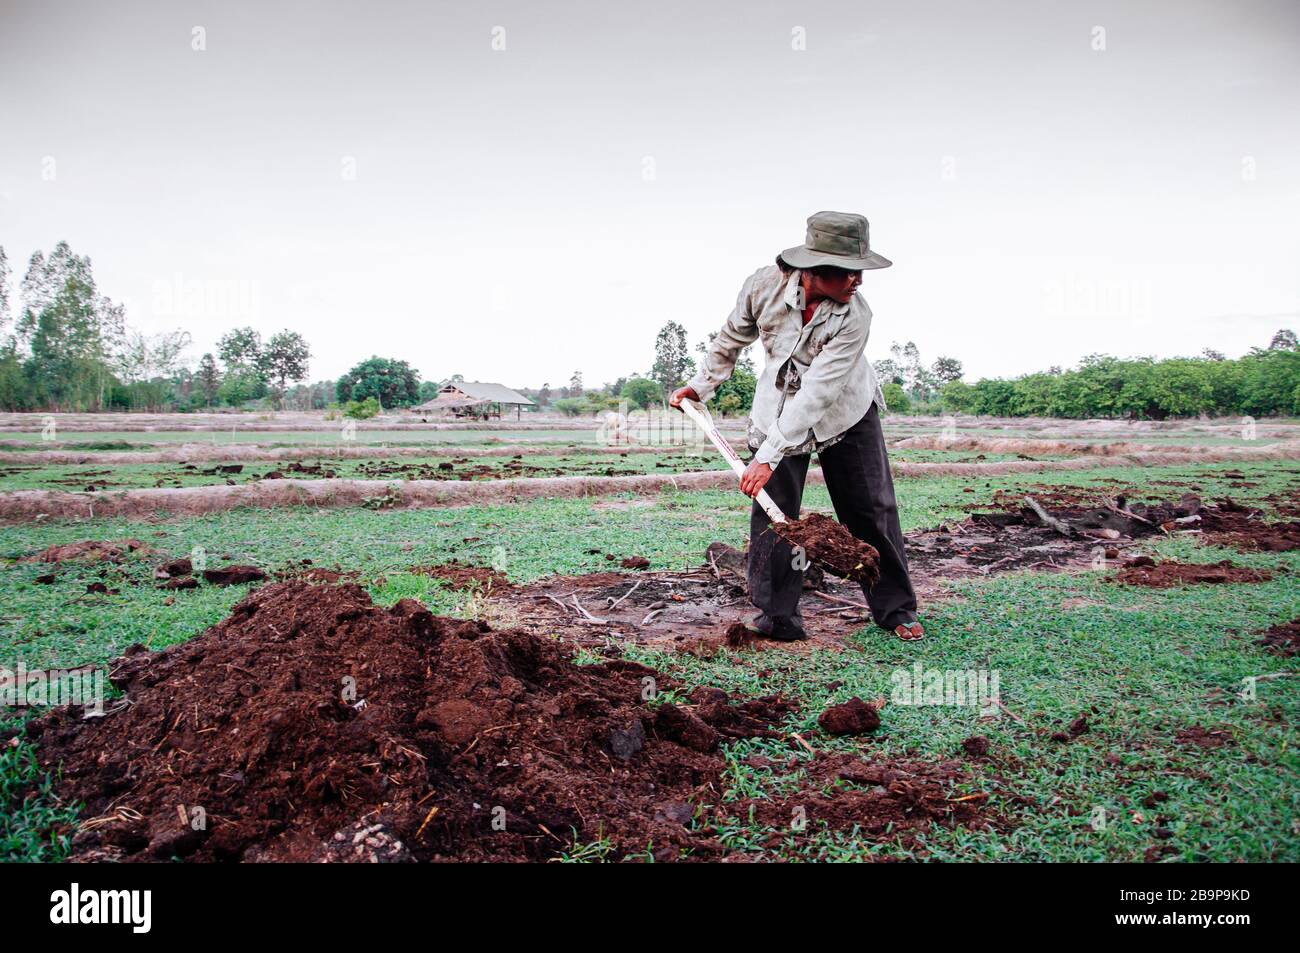 MAY 16, 2010 , Ubon Ratchathani, Thailand - Local Asian female farmer digging into soil ground in farmland for tree planting. Stock Photo